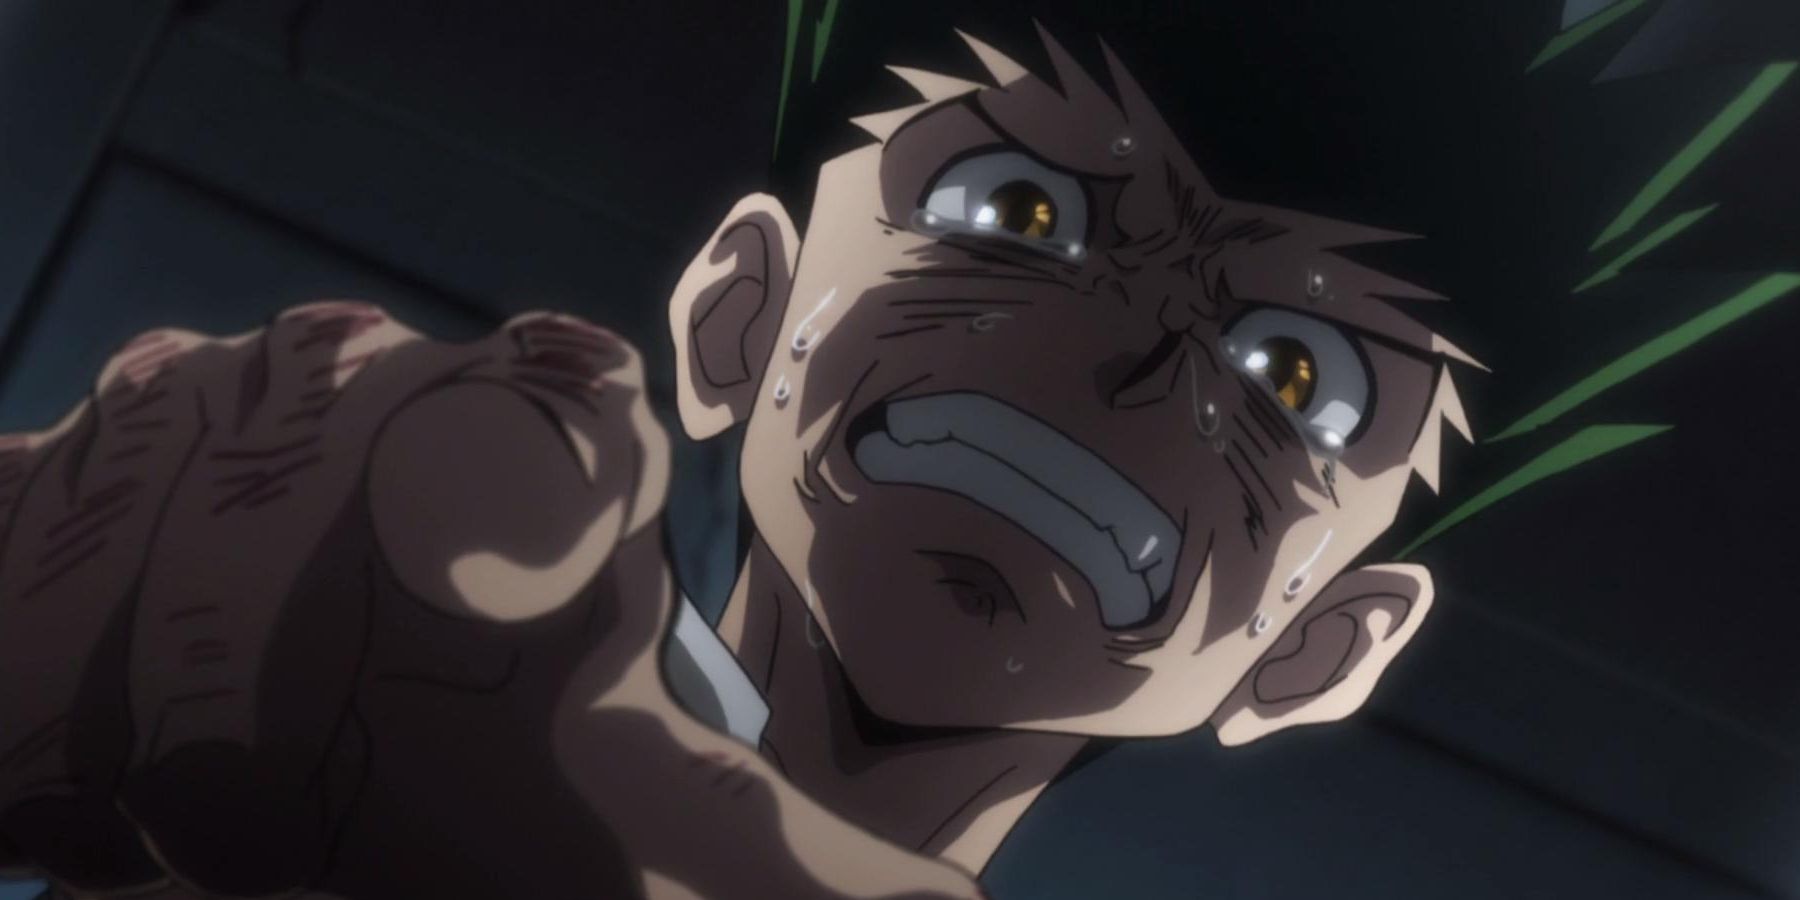 Gon crying